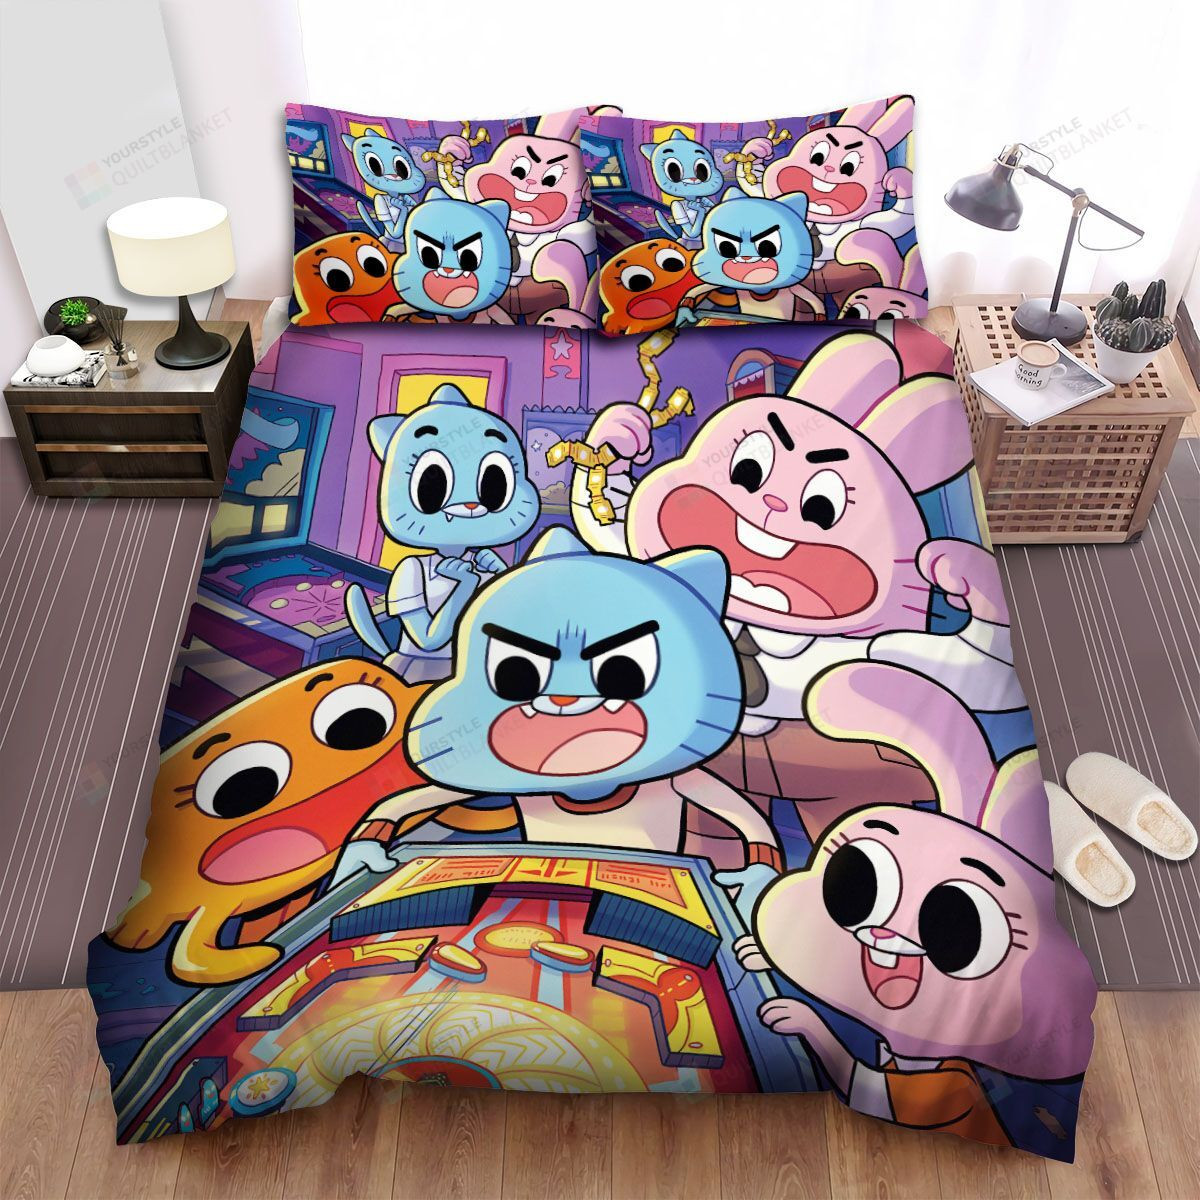 the amazing world of gumball playing pinball bed sheet spread duvet cover bedding sets 3223 doolv